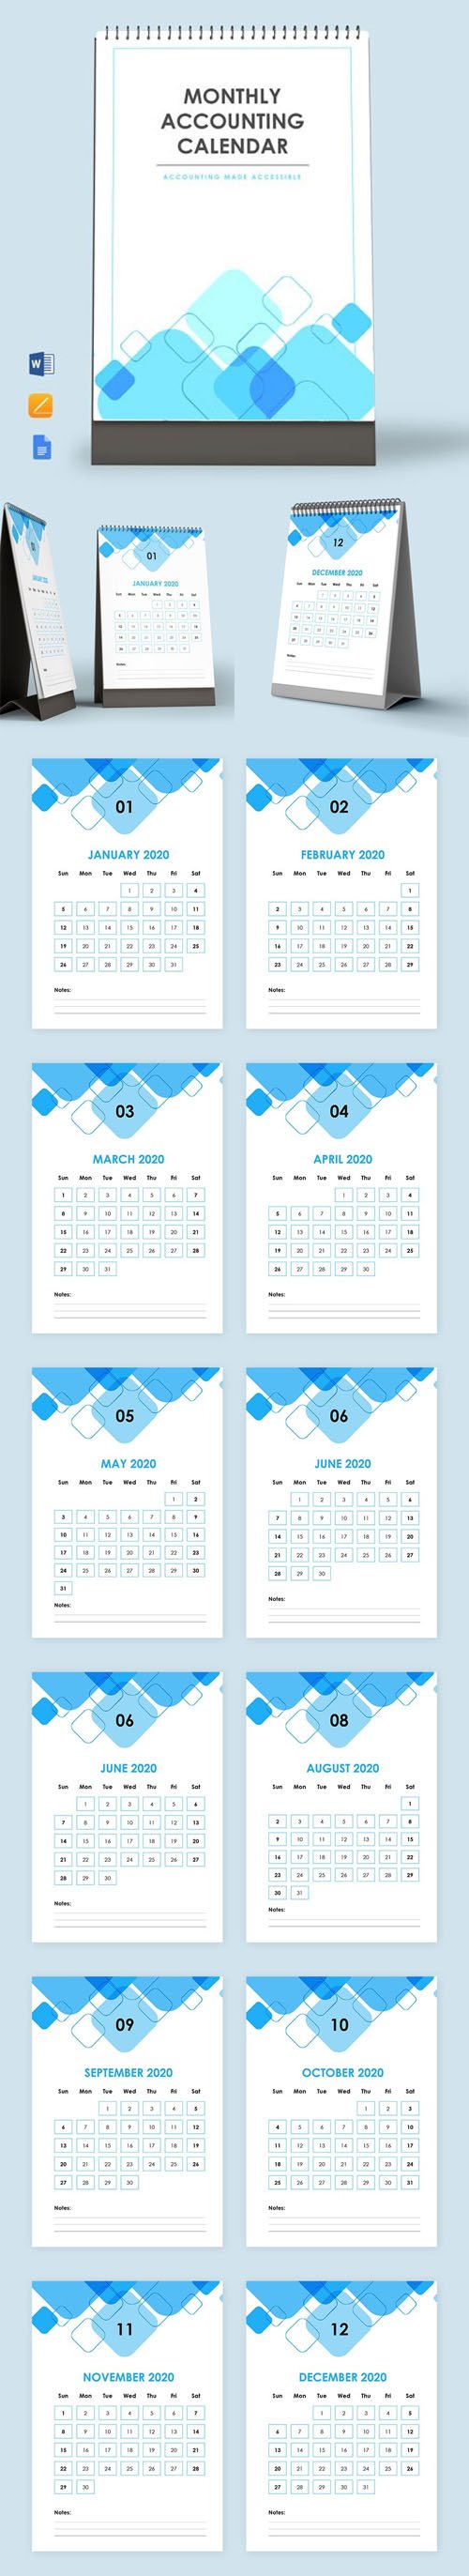 Monthly Accounting Desk Calendar Templates